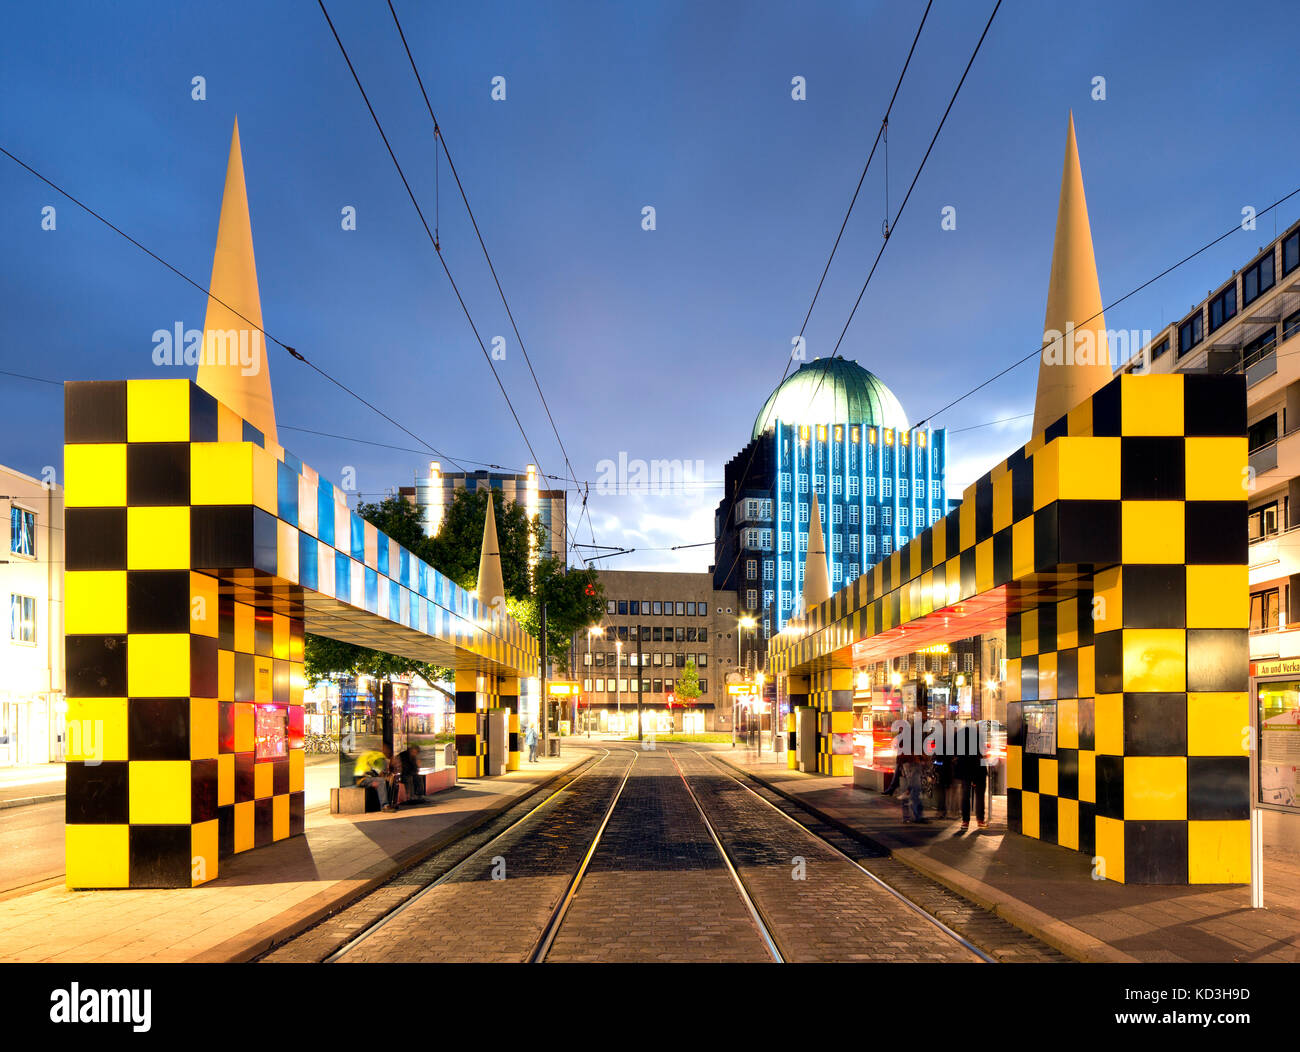 Tram stop Steintor, artist Alessandro Mendini, rear Anzeiger high-rise, evening twilight, Hannover, Lower Saxony, Germany Stock Photo